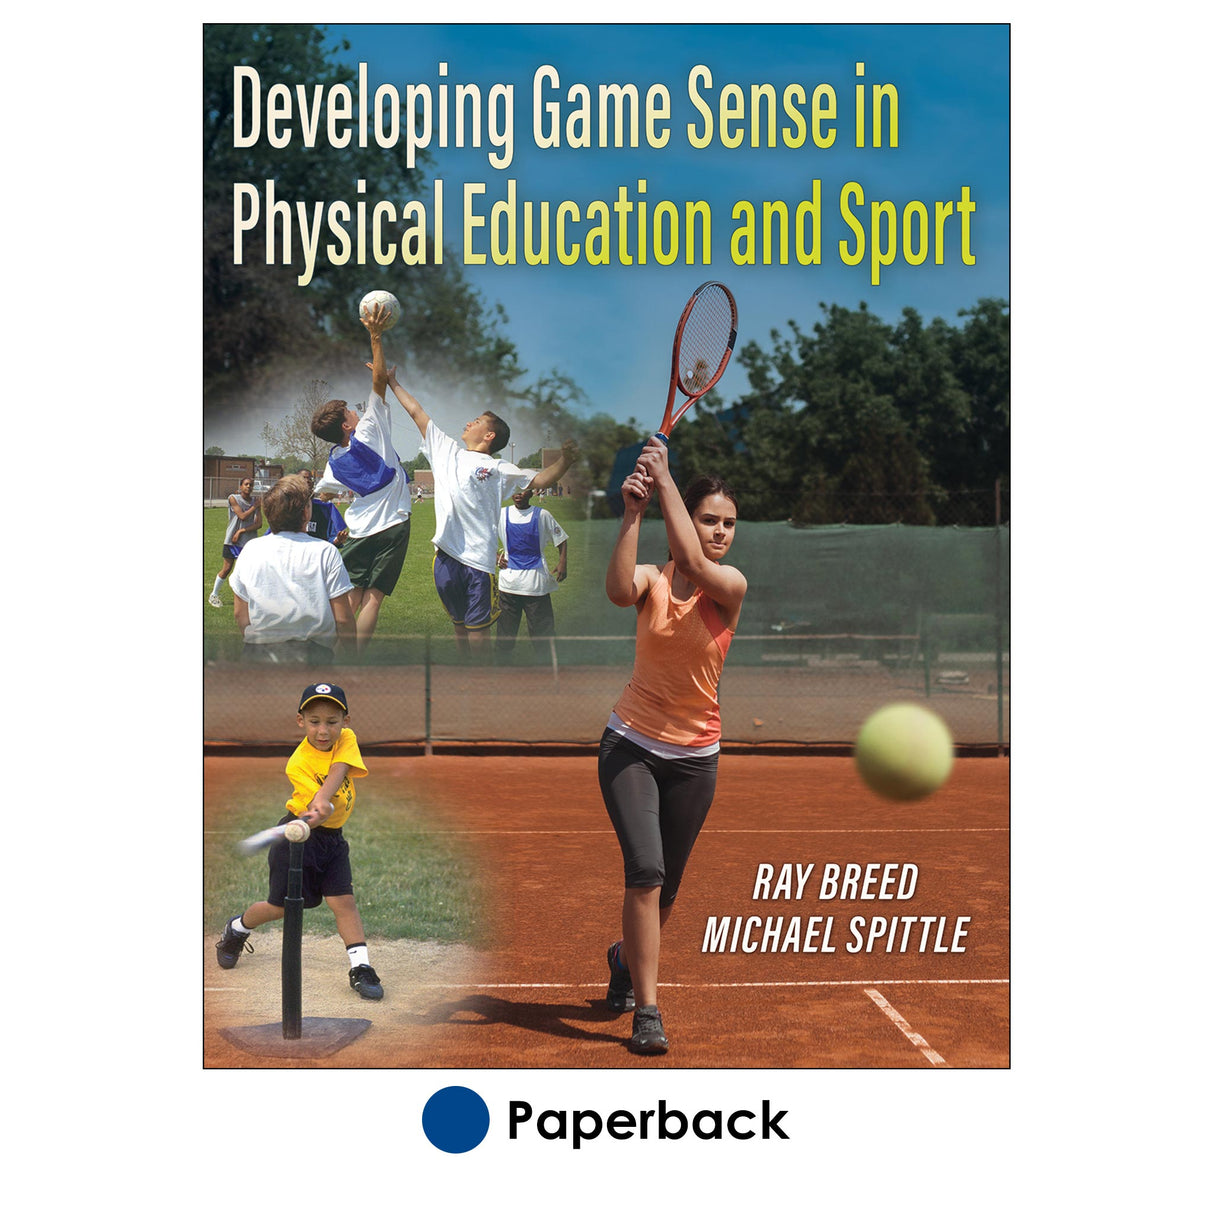 Developing Game Sense in Physical Education and Sport